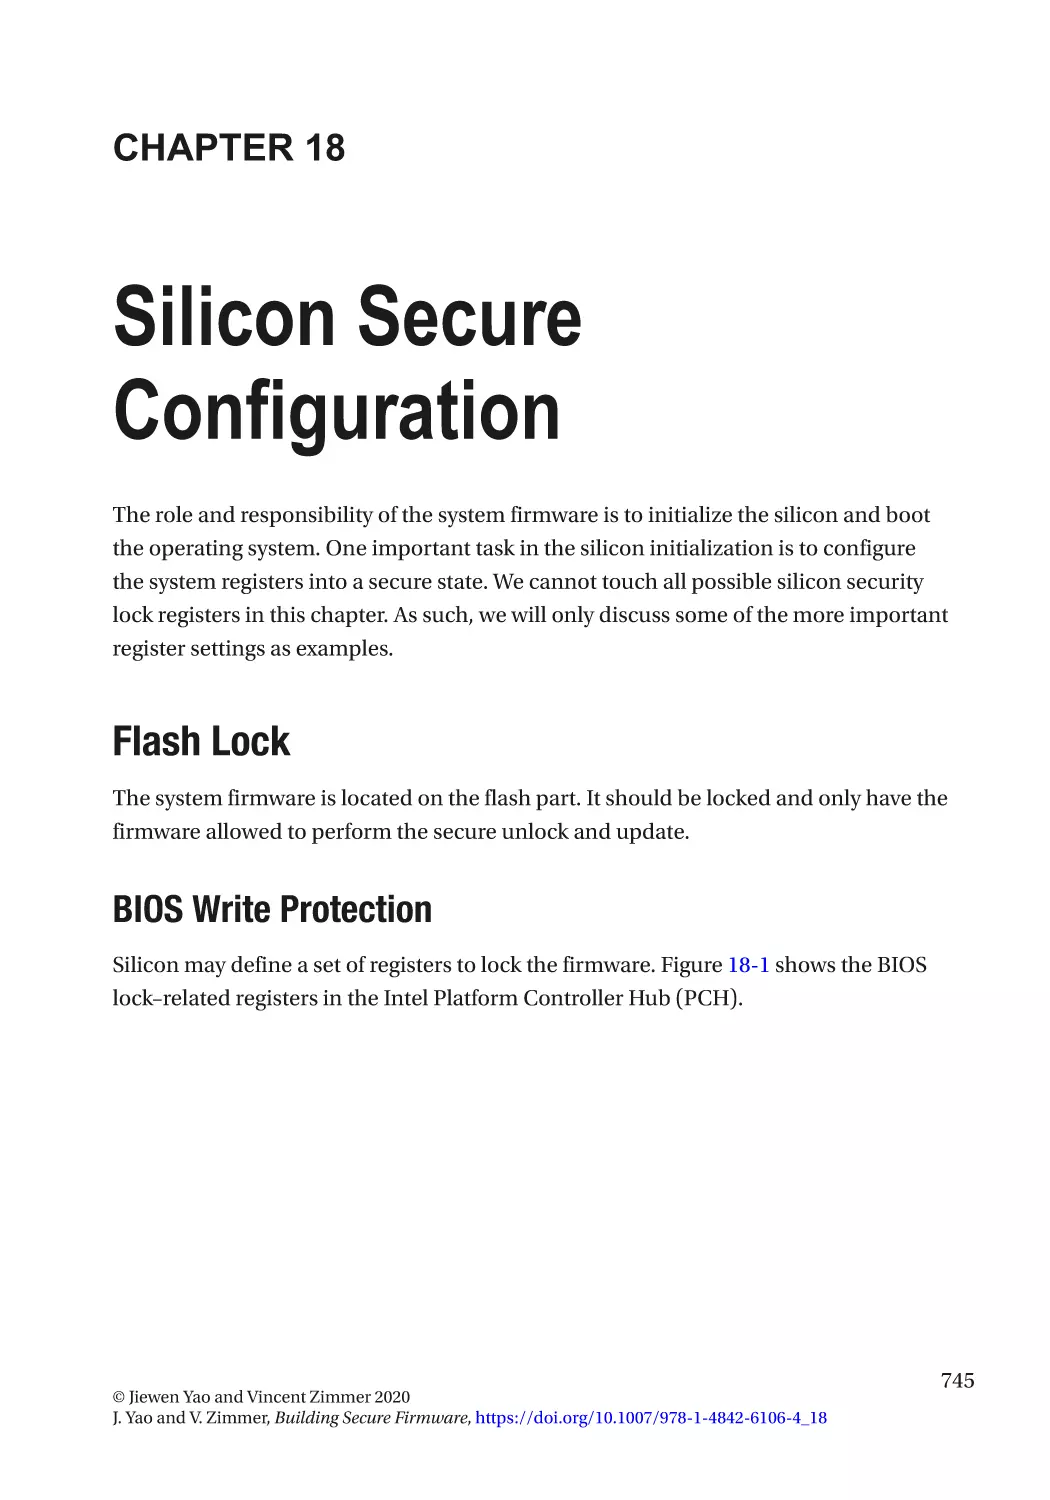 Chapter 18
Flash Lock
BIOS Write Protection